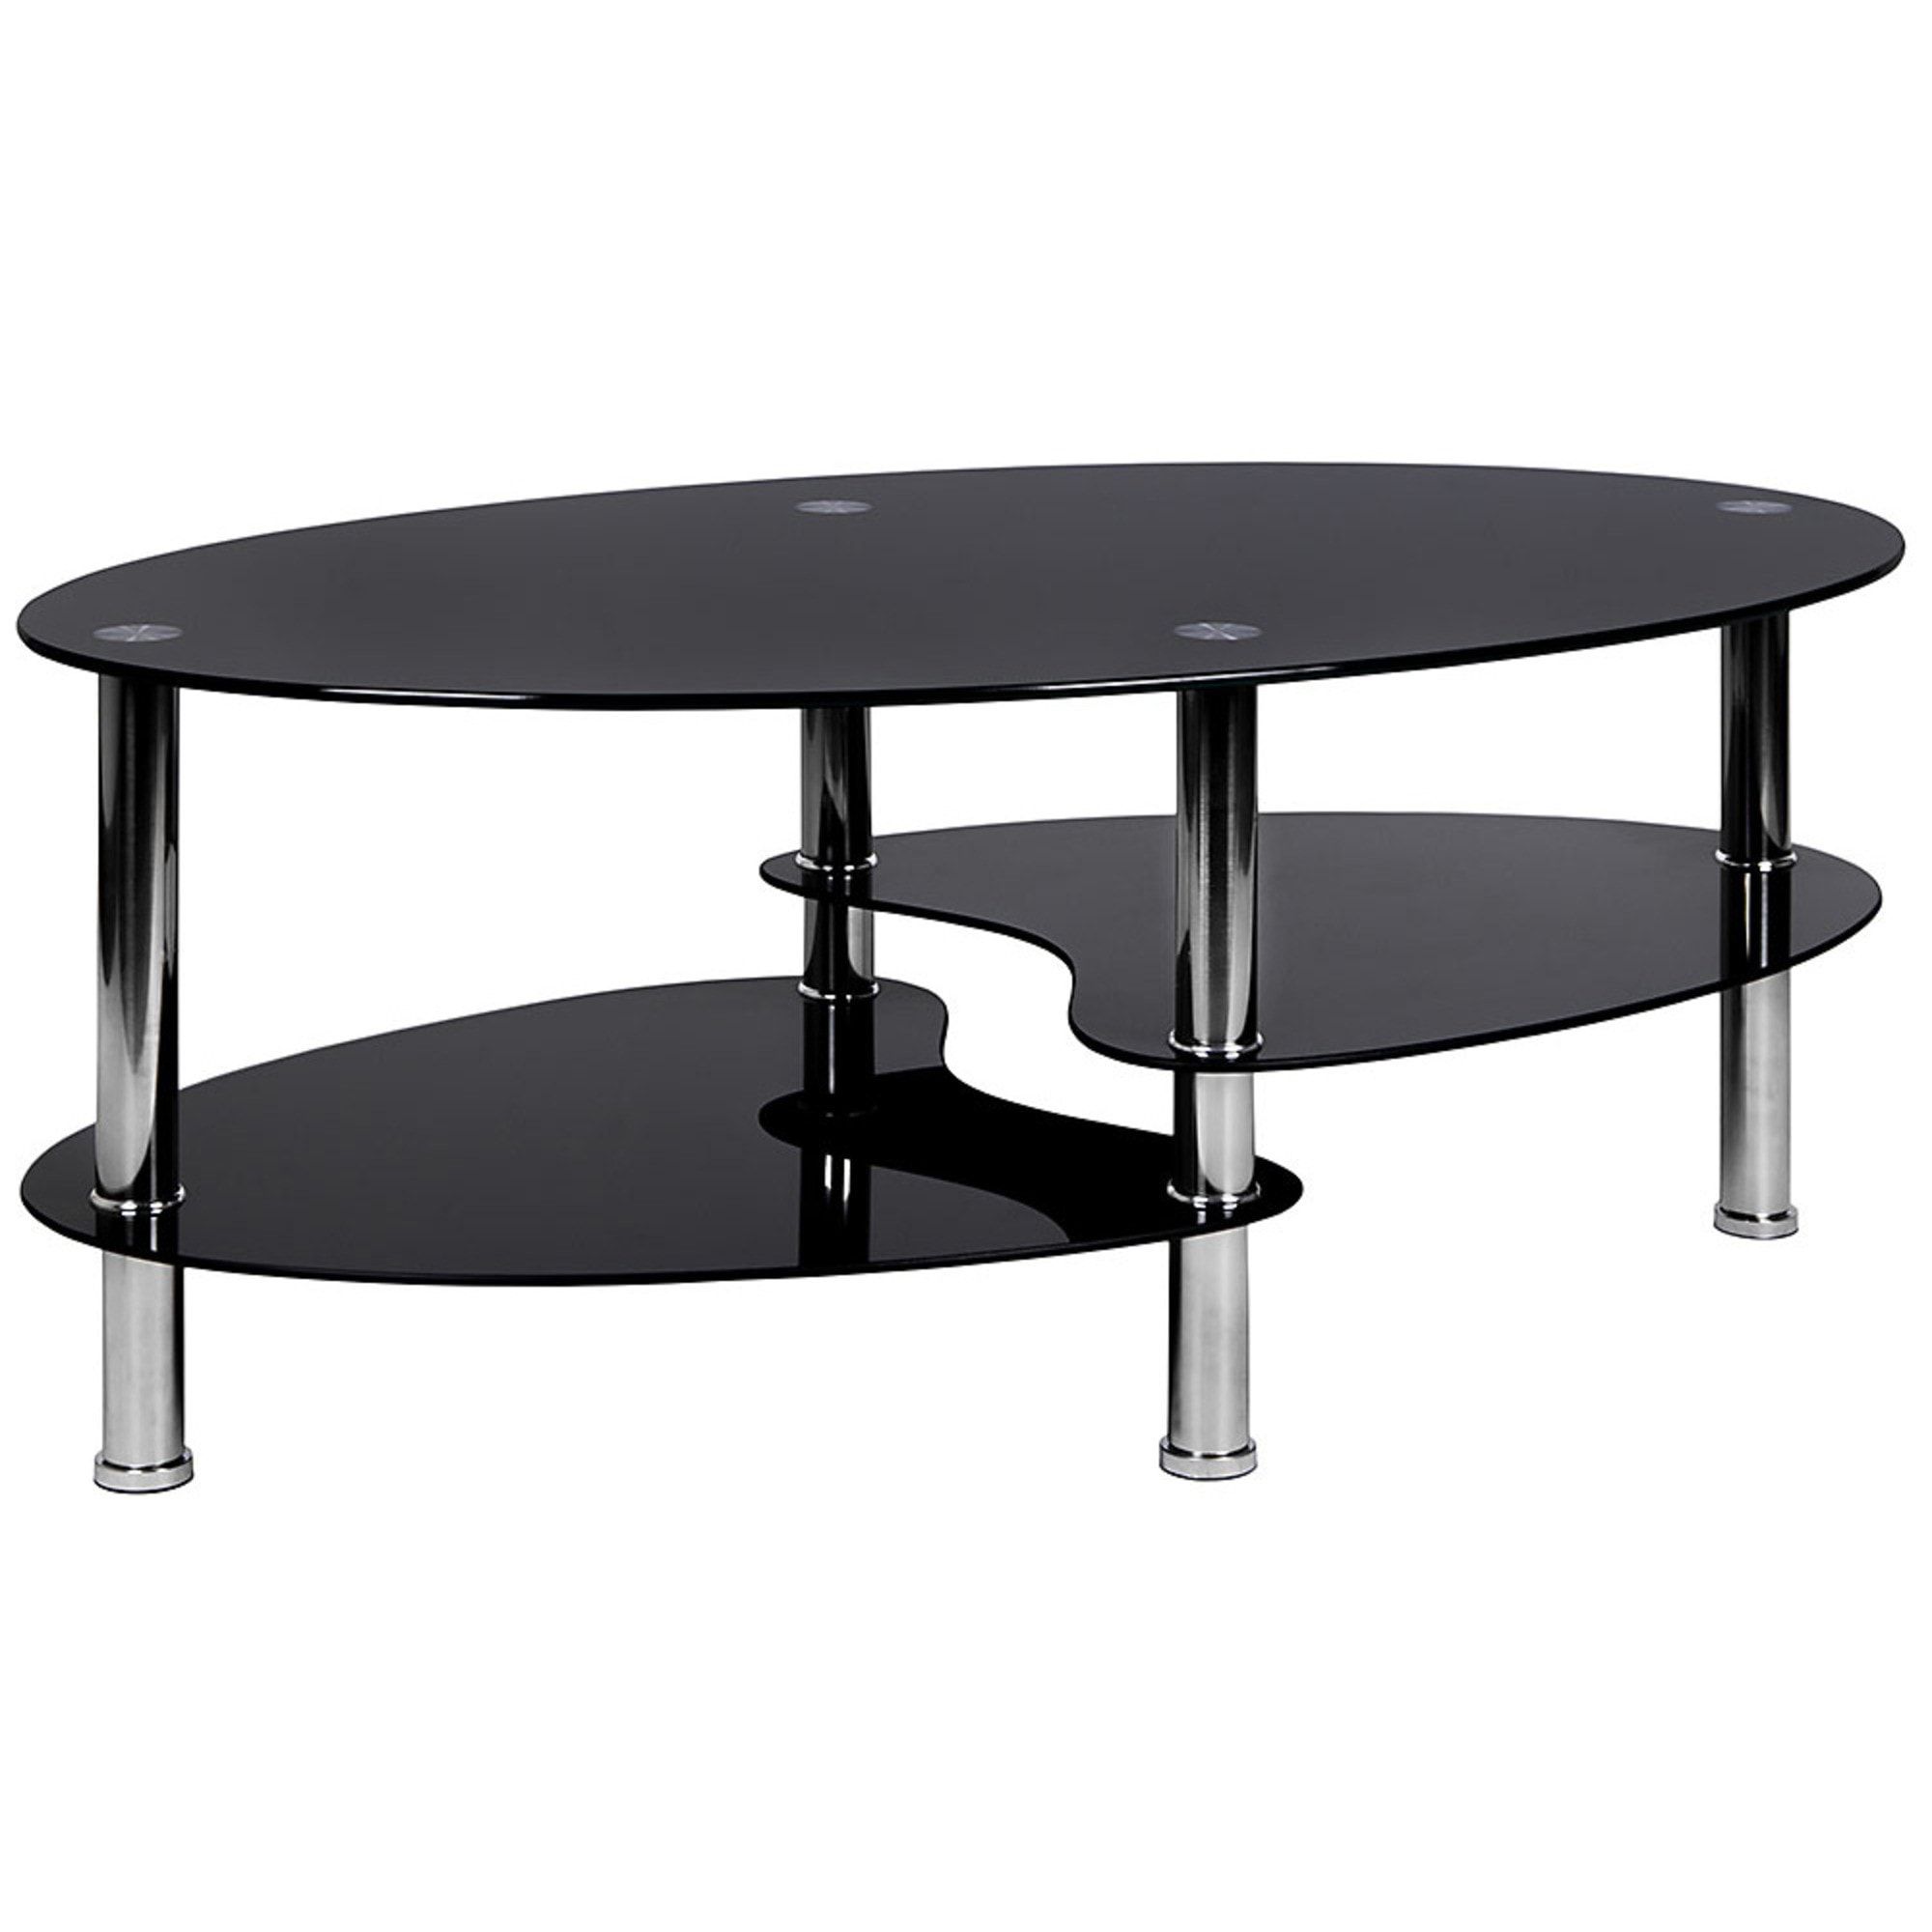 Cara Oval Black Glass Coffee Table | Dining | Glass Furniture With Regard To Glass Oval Coffee Tables (View 18 of 20)